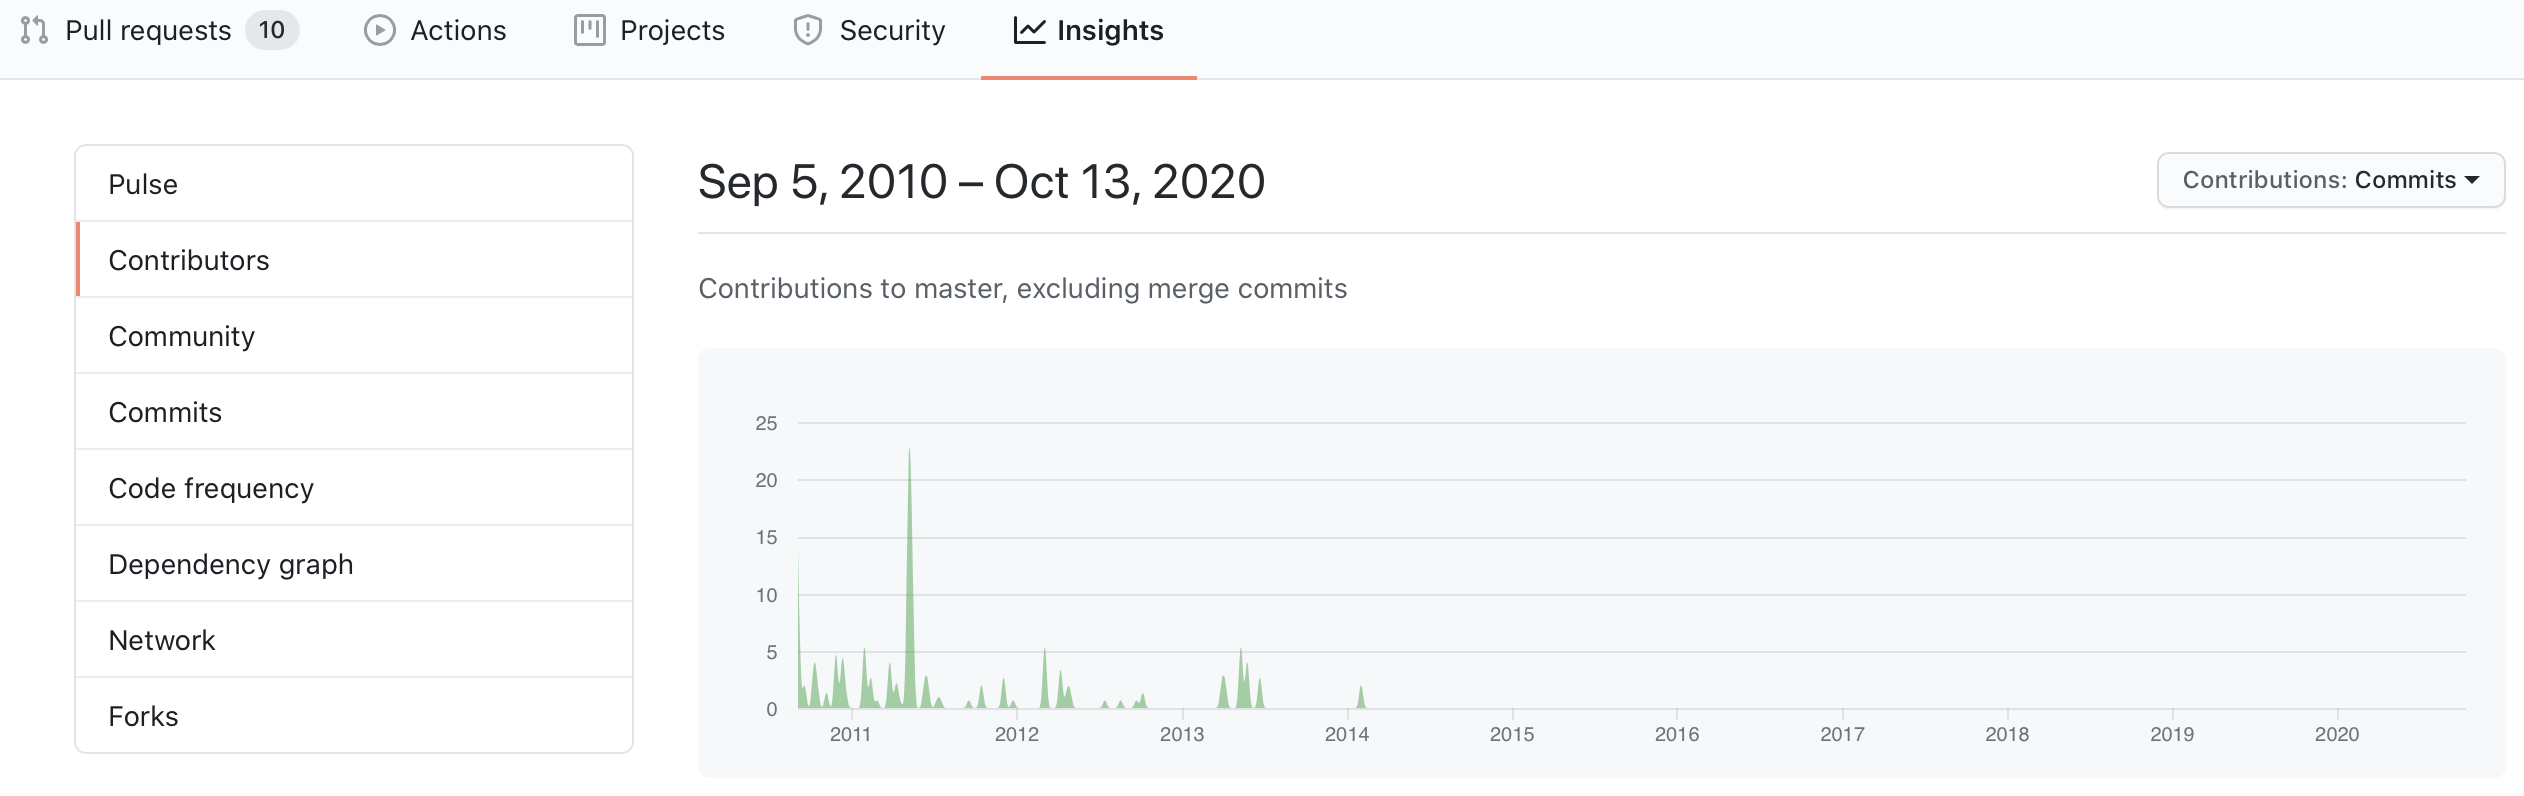 Github's Insights > Contributors page is the right place to find out if a project is abandoned